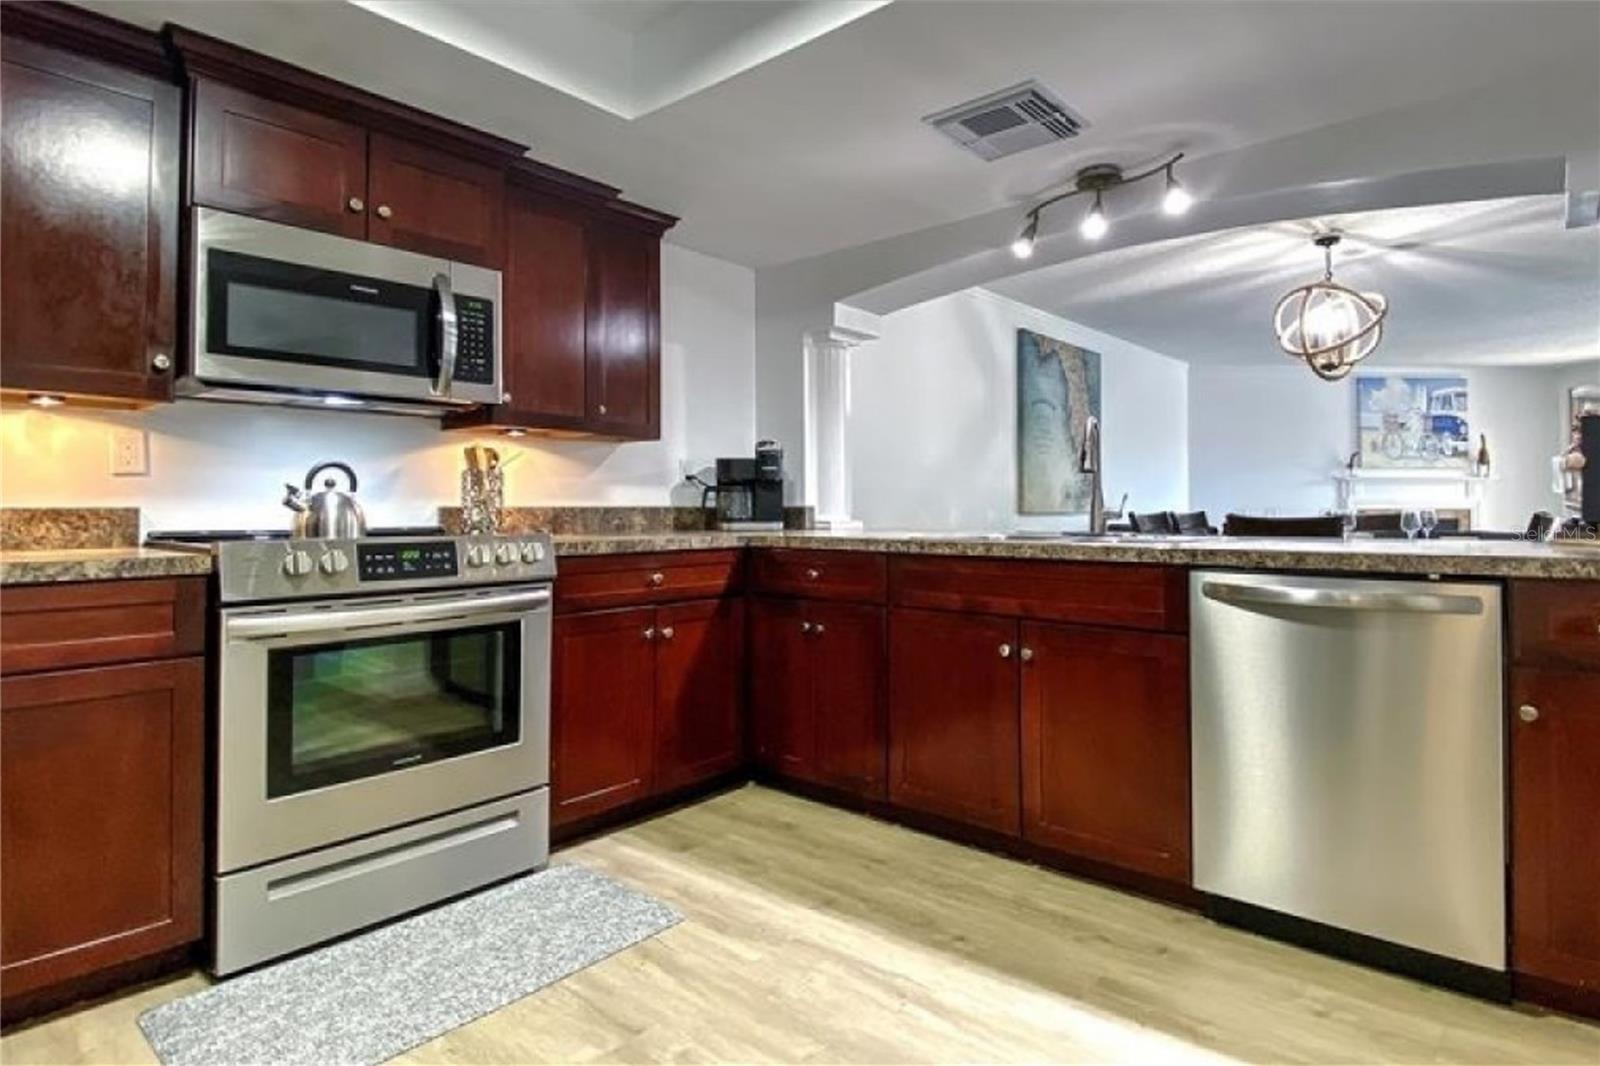 Large kitchen, stainless appliances